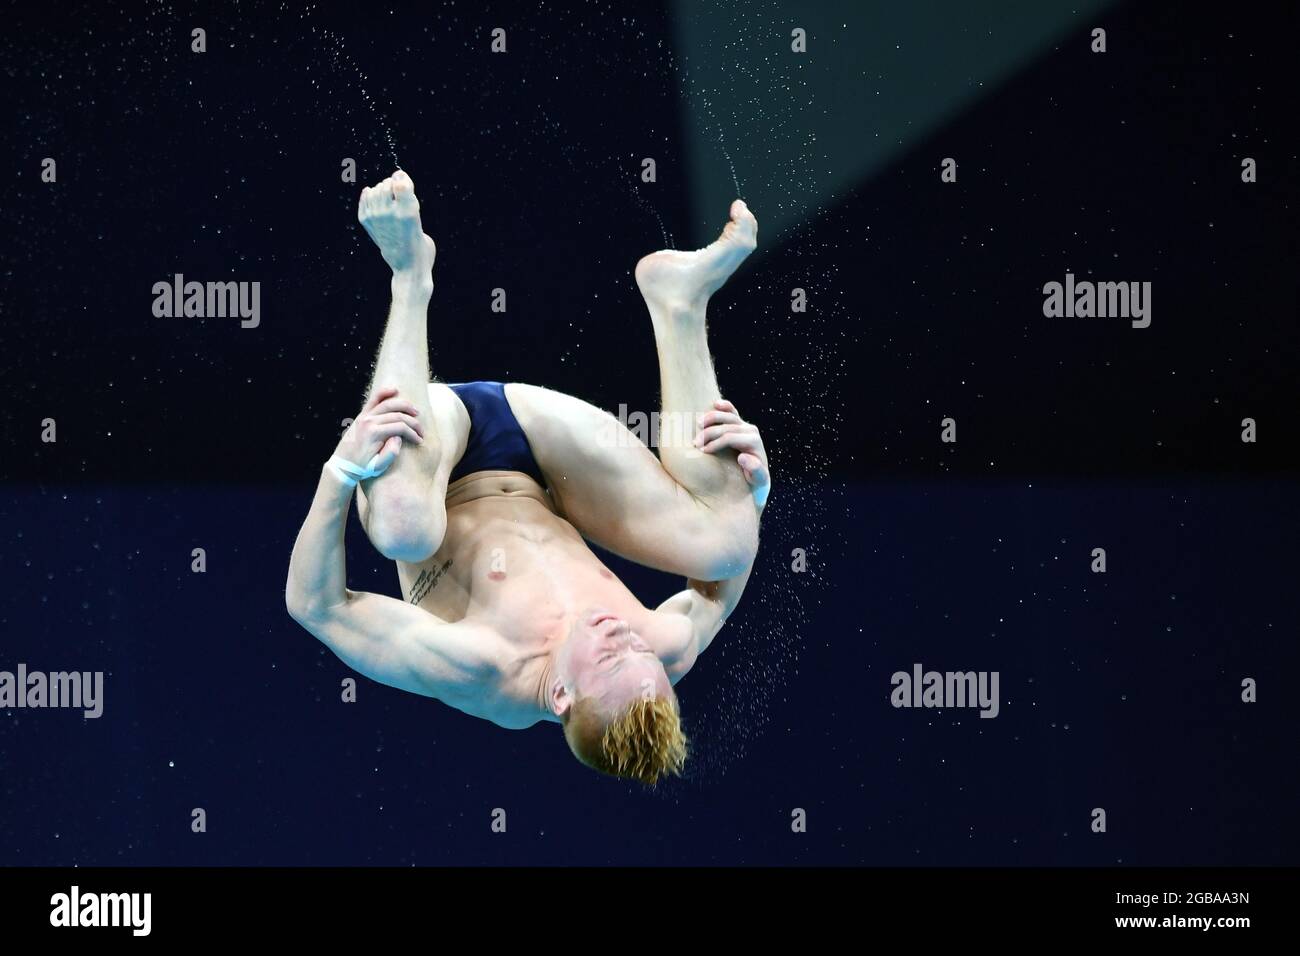 Tokyo, Japan. 03rd Aug, 2021. Swimming: Olympics, preliminaries, water diving - artistic diving 3m, men, final, Tokyo Aquatics Centre. Andrew Capobianco from the USA in action. Credit: Swen Pförtner/dpa/Alamy Live News Stock Photo